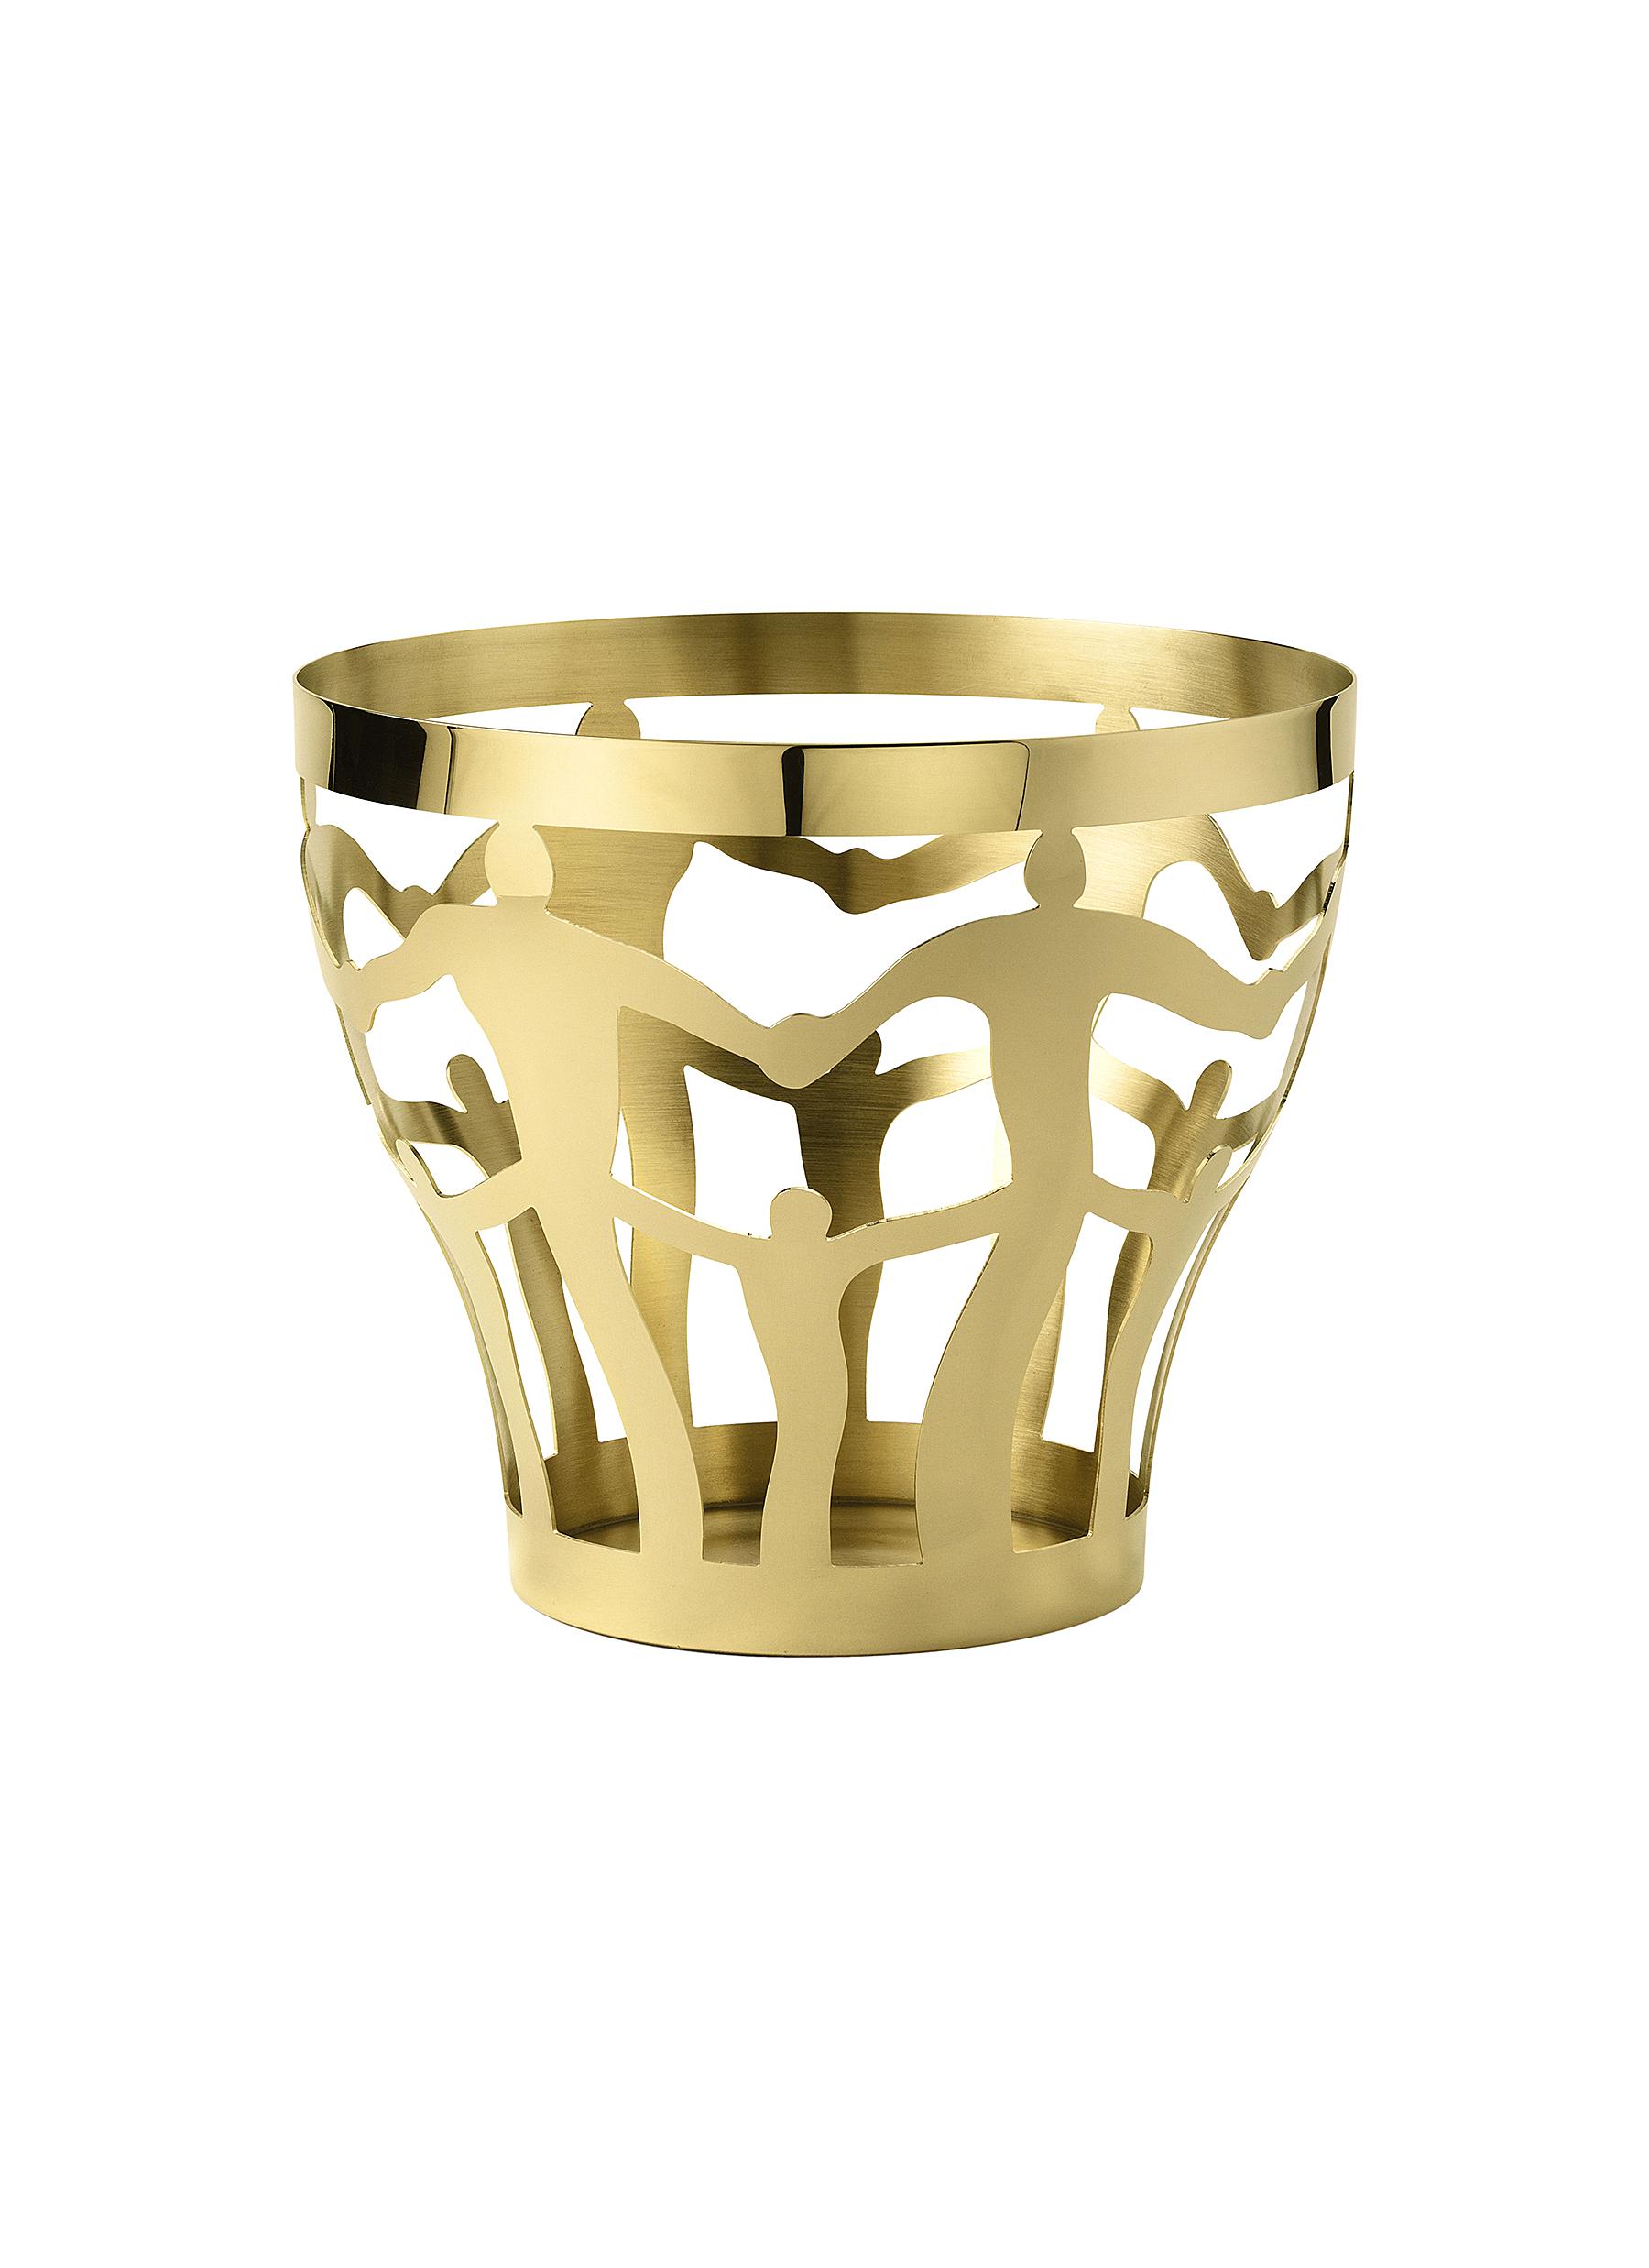 Ghidini Large Bowl - Polished Brass In Polished Gold